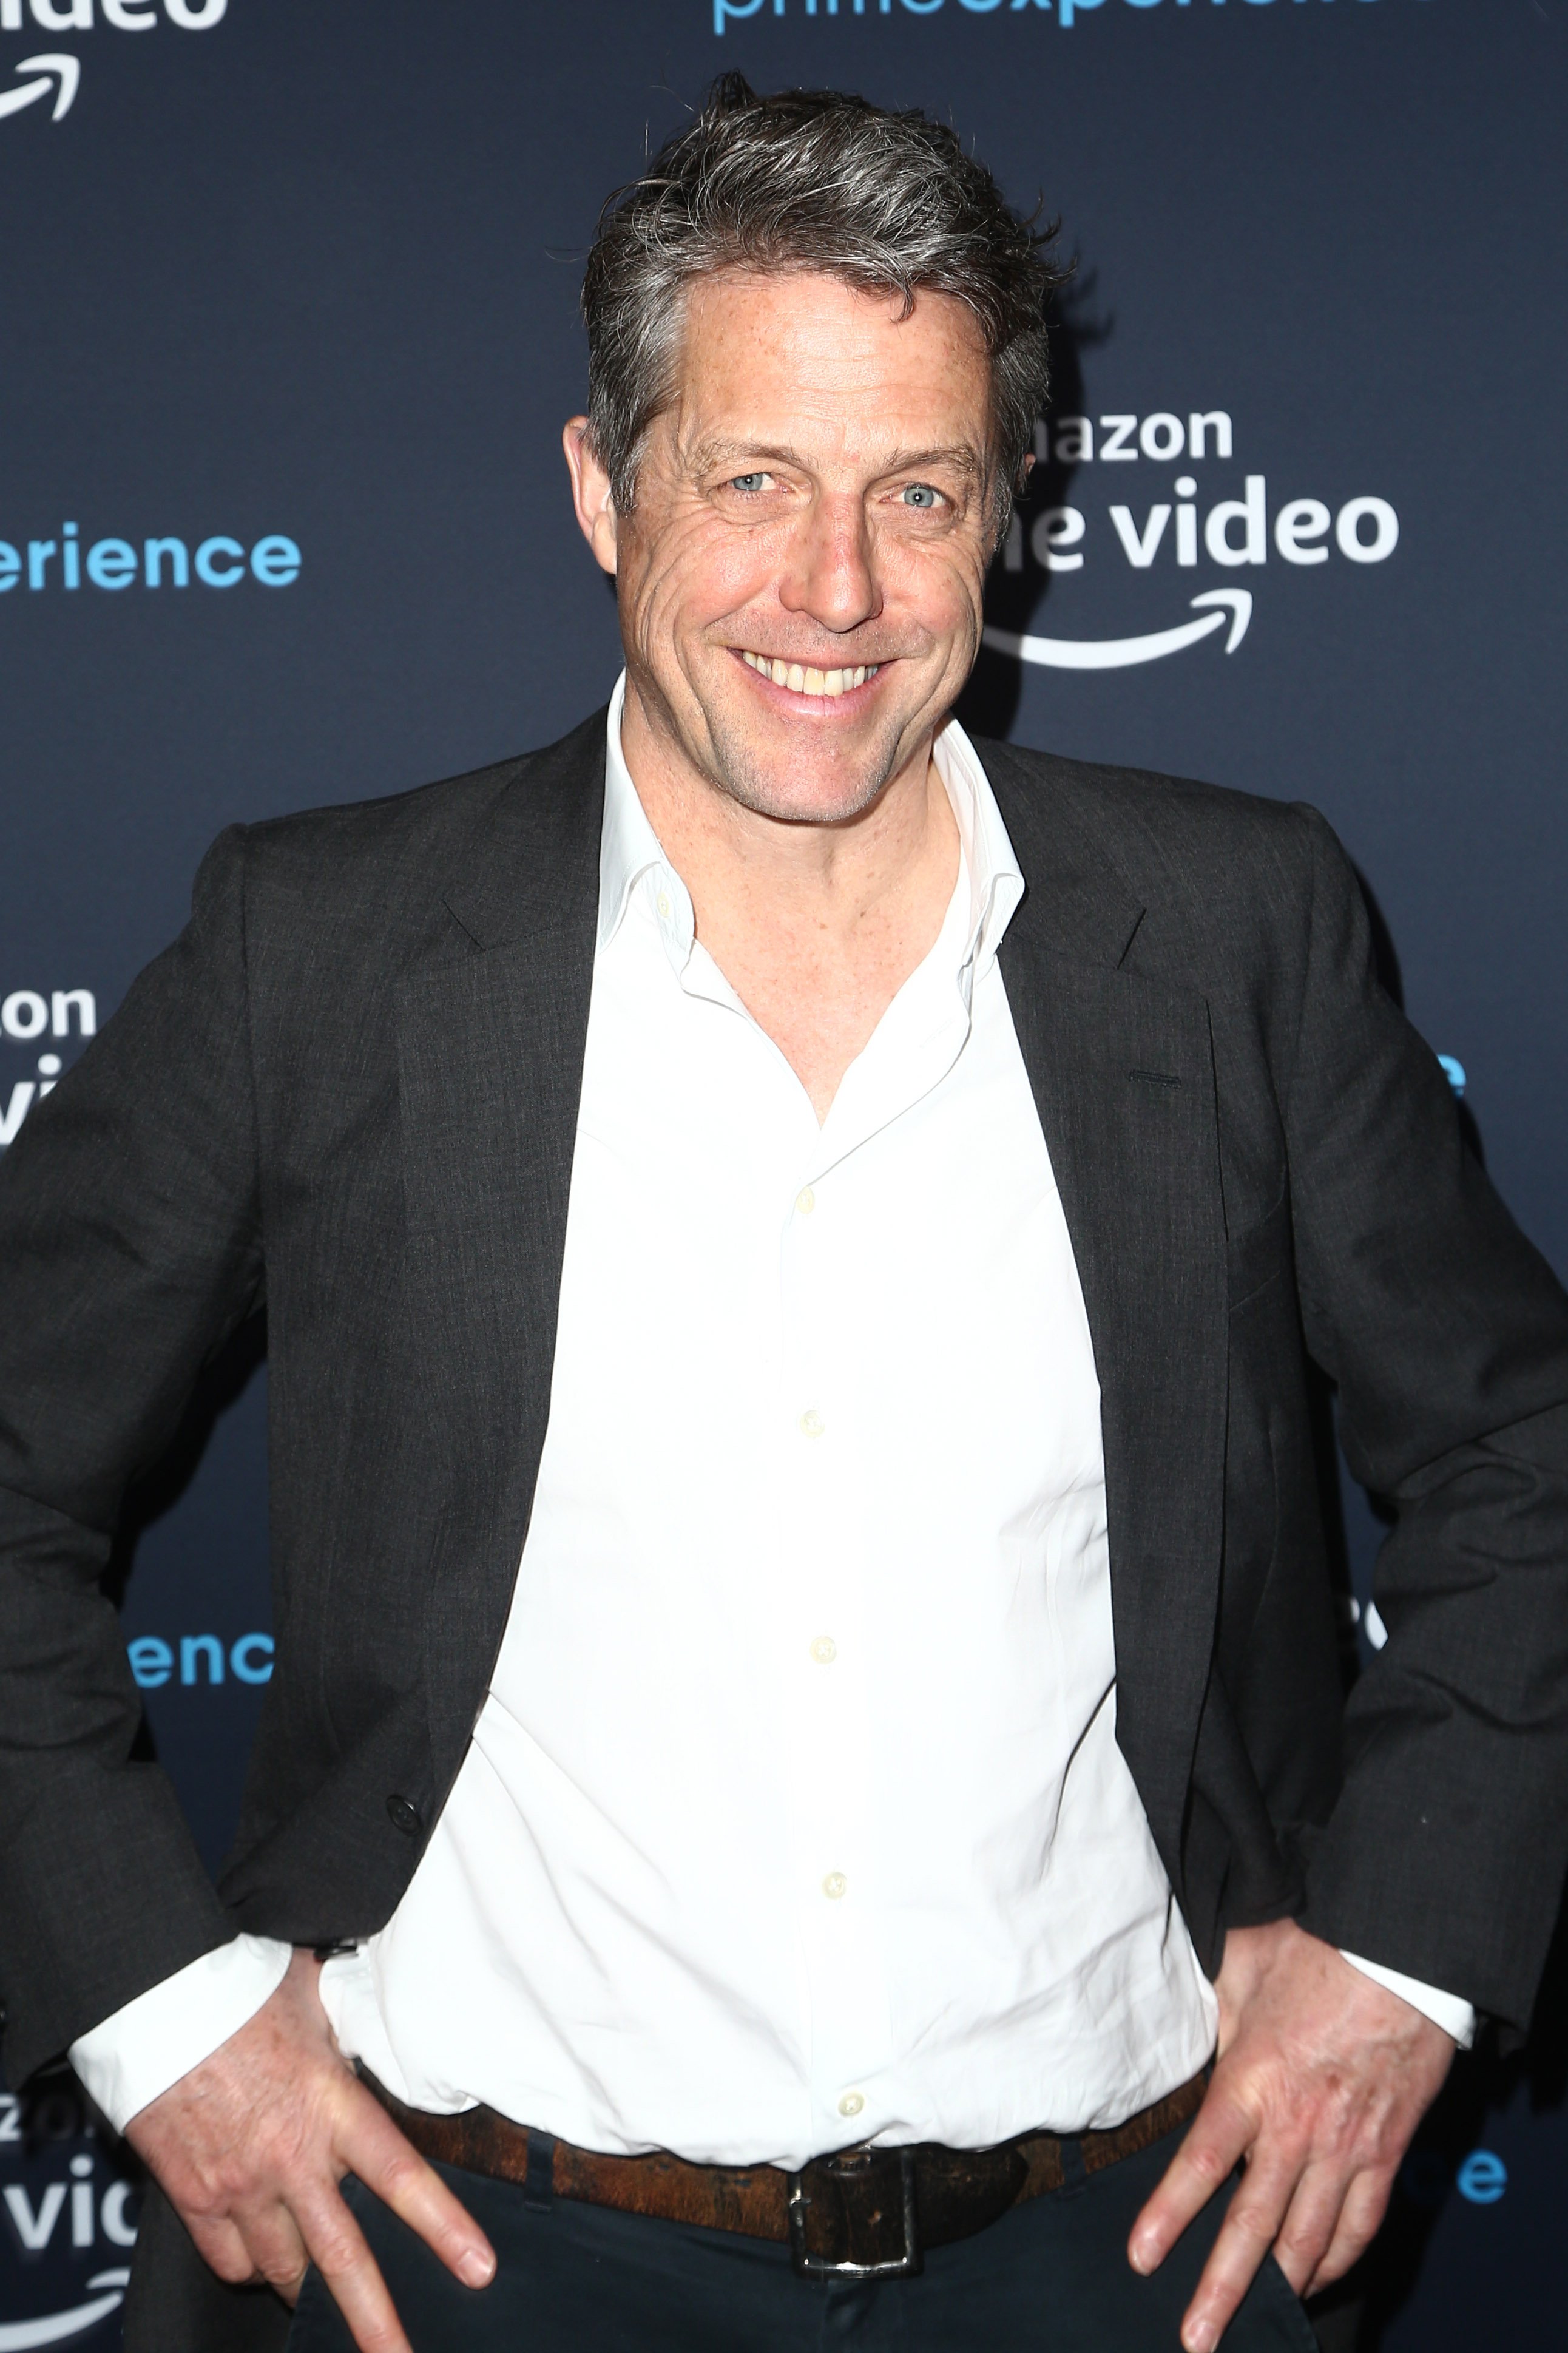 Hugh Grant attends the Amazon Prime Experience Hosts "A Very English Scandal" FYC Screening And Panel at Hollywood Athletic Club on April 28, 2019, in Hollywood, California. | Source: Getty Images.